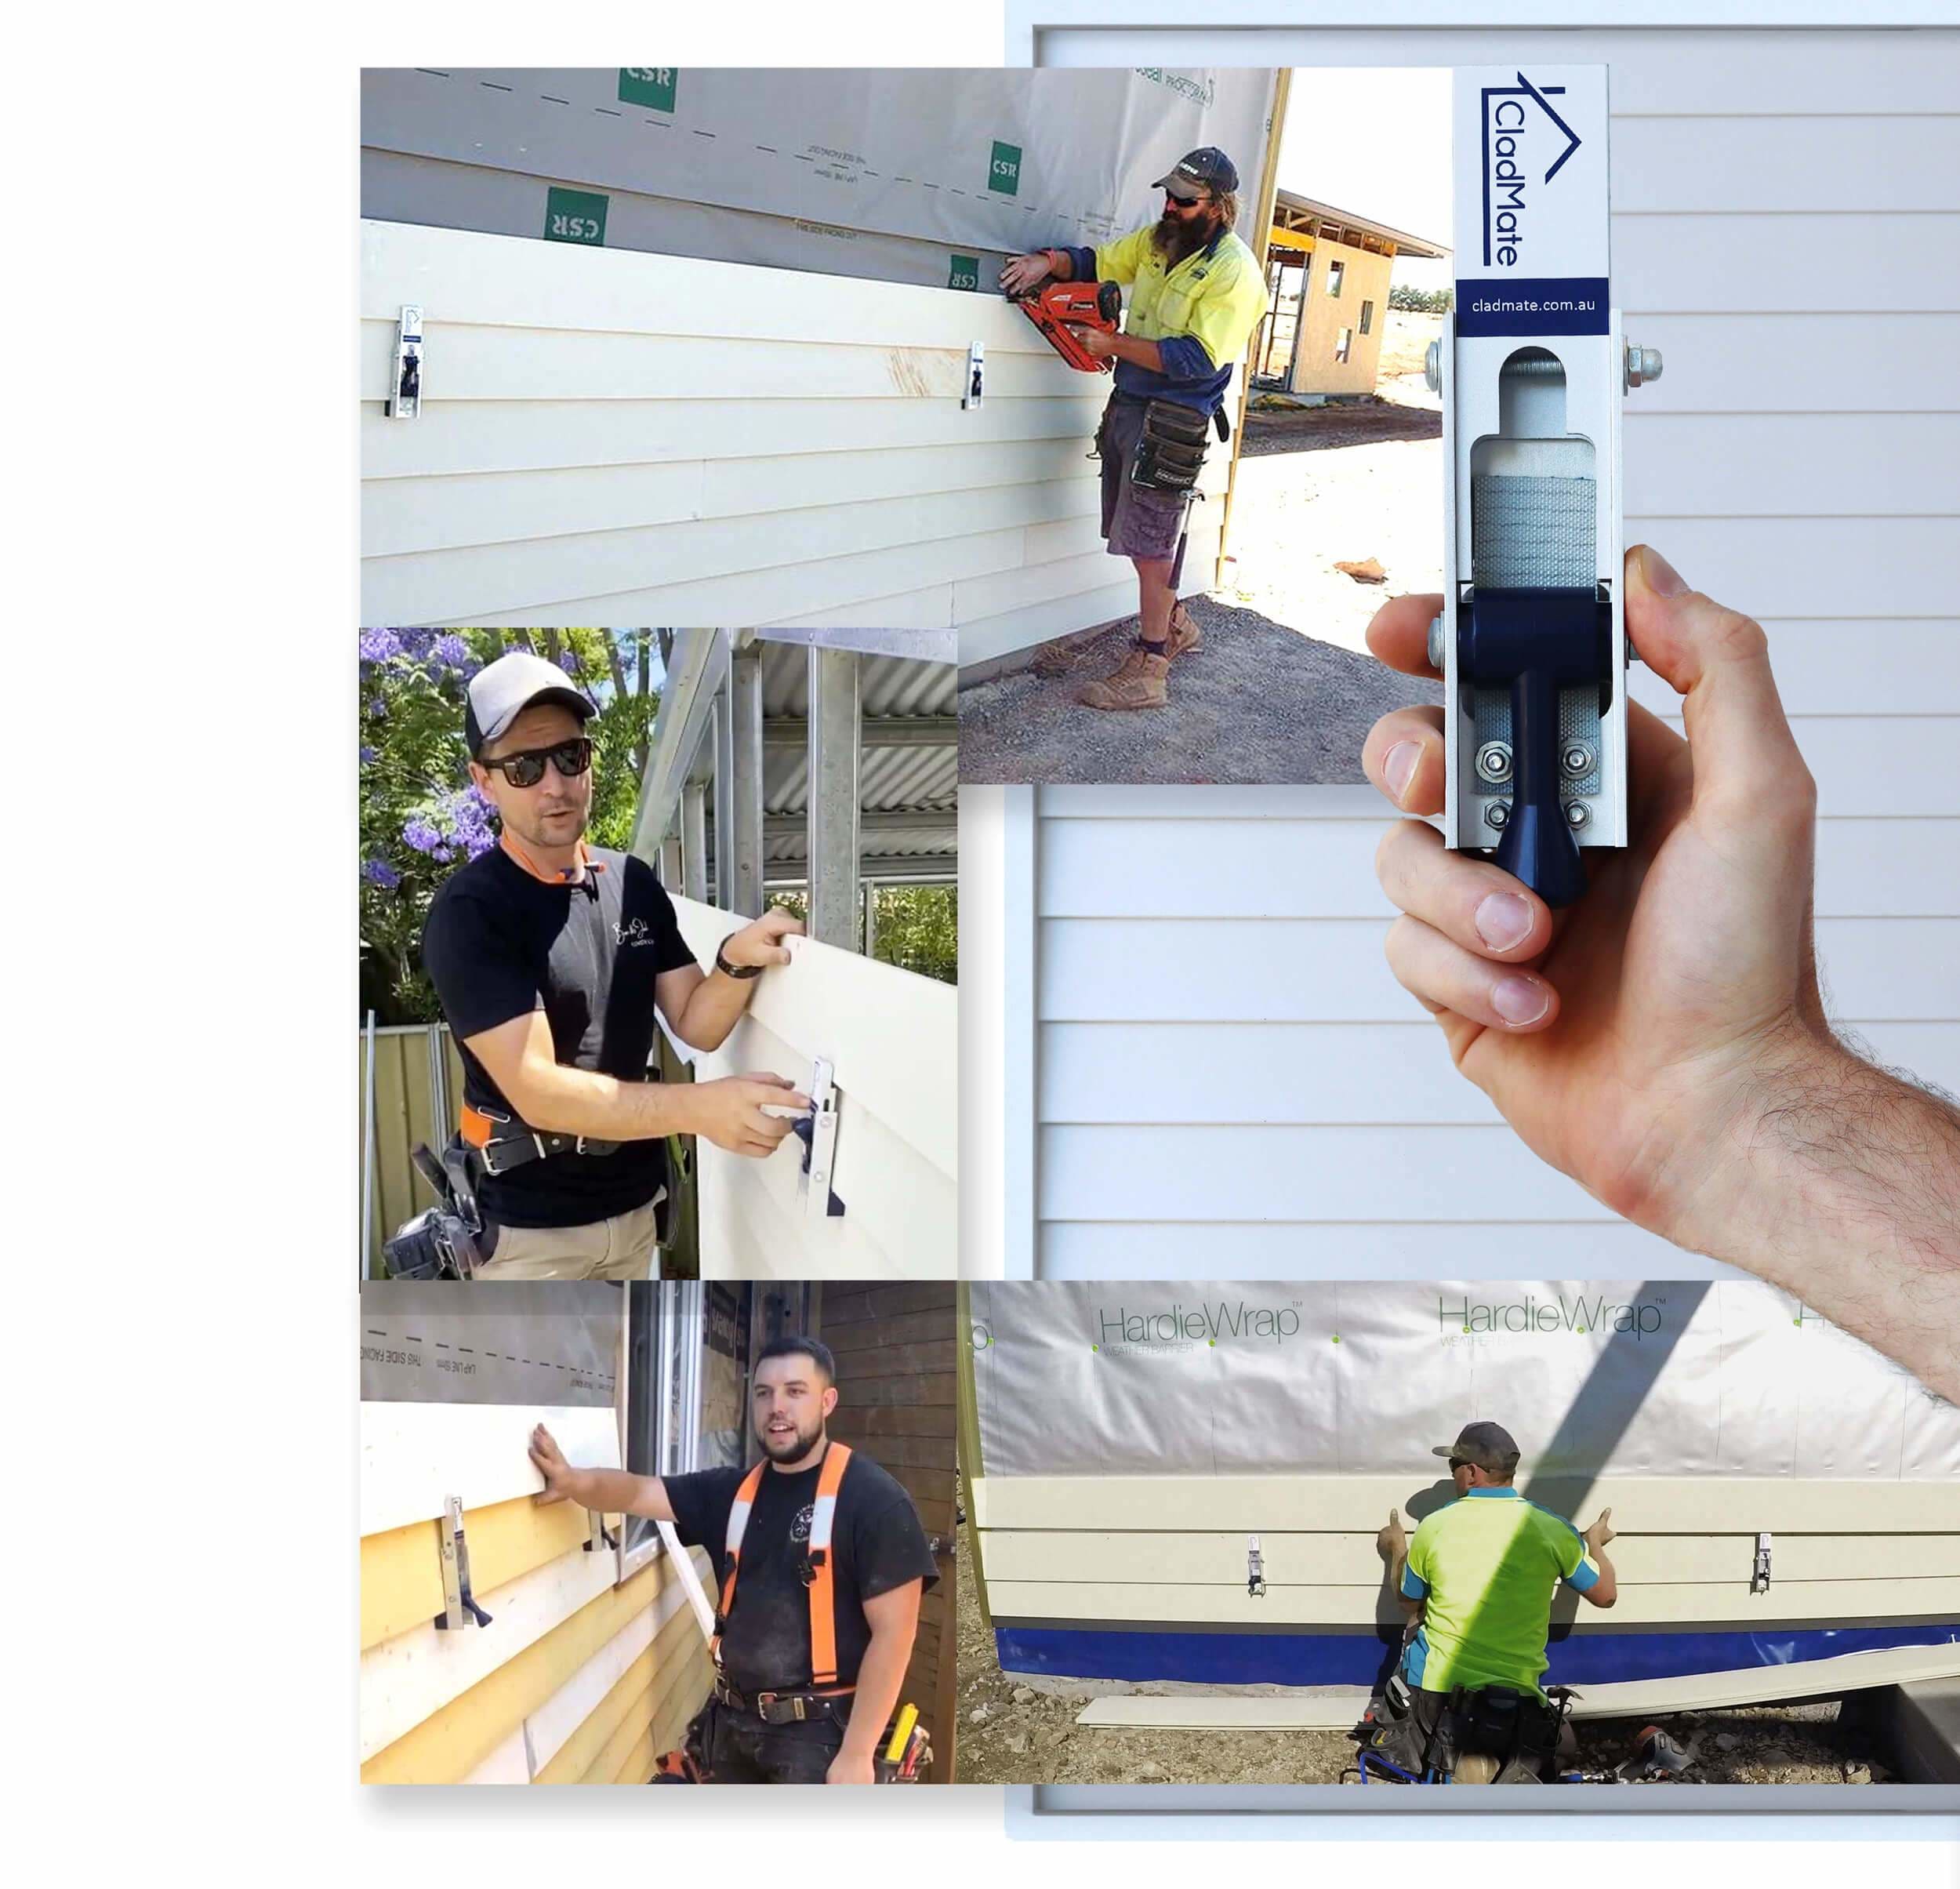 CladMate Gallery of Carpenters Using CladMate on Weatherboards